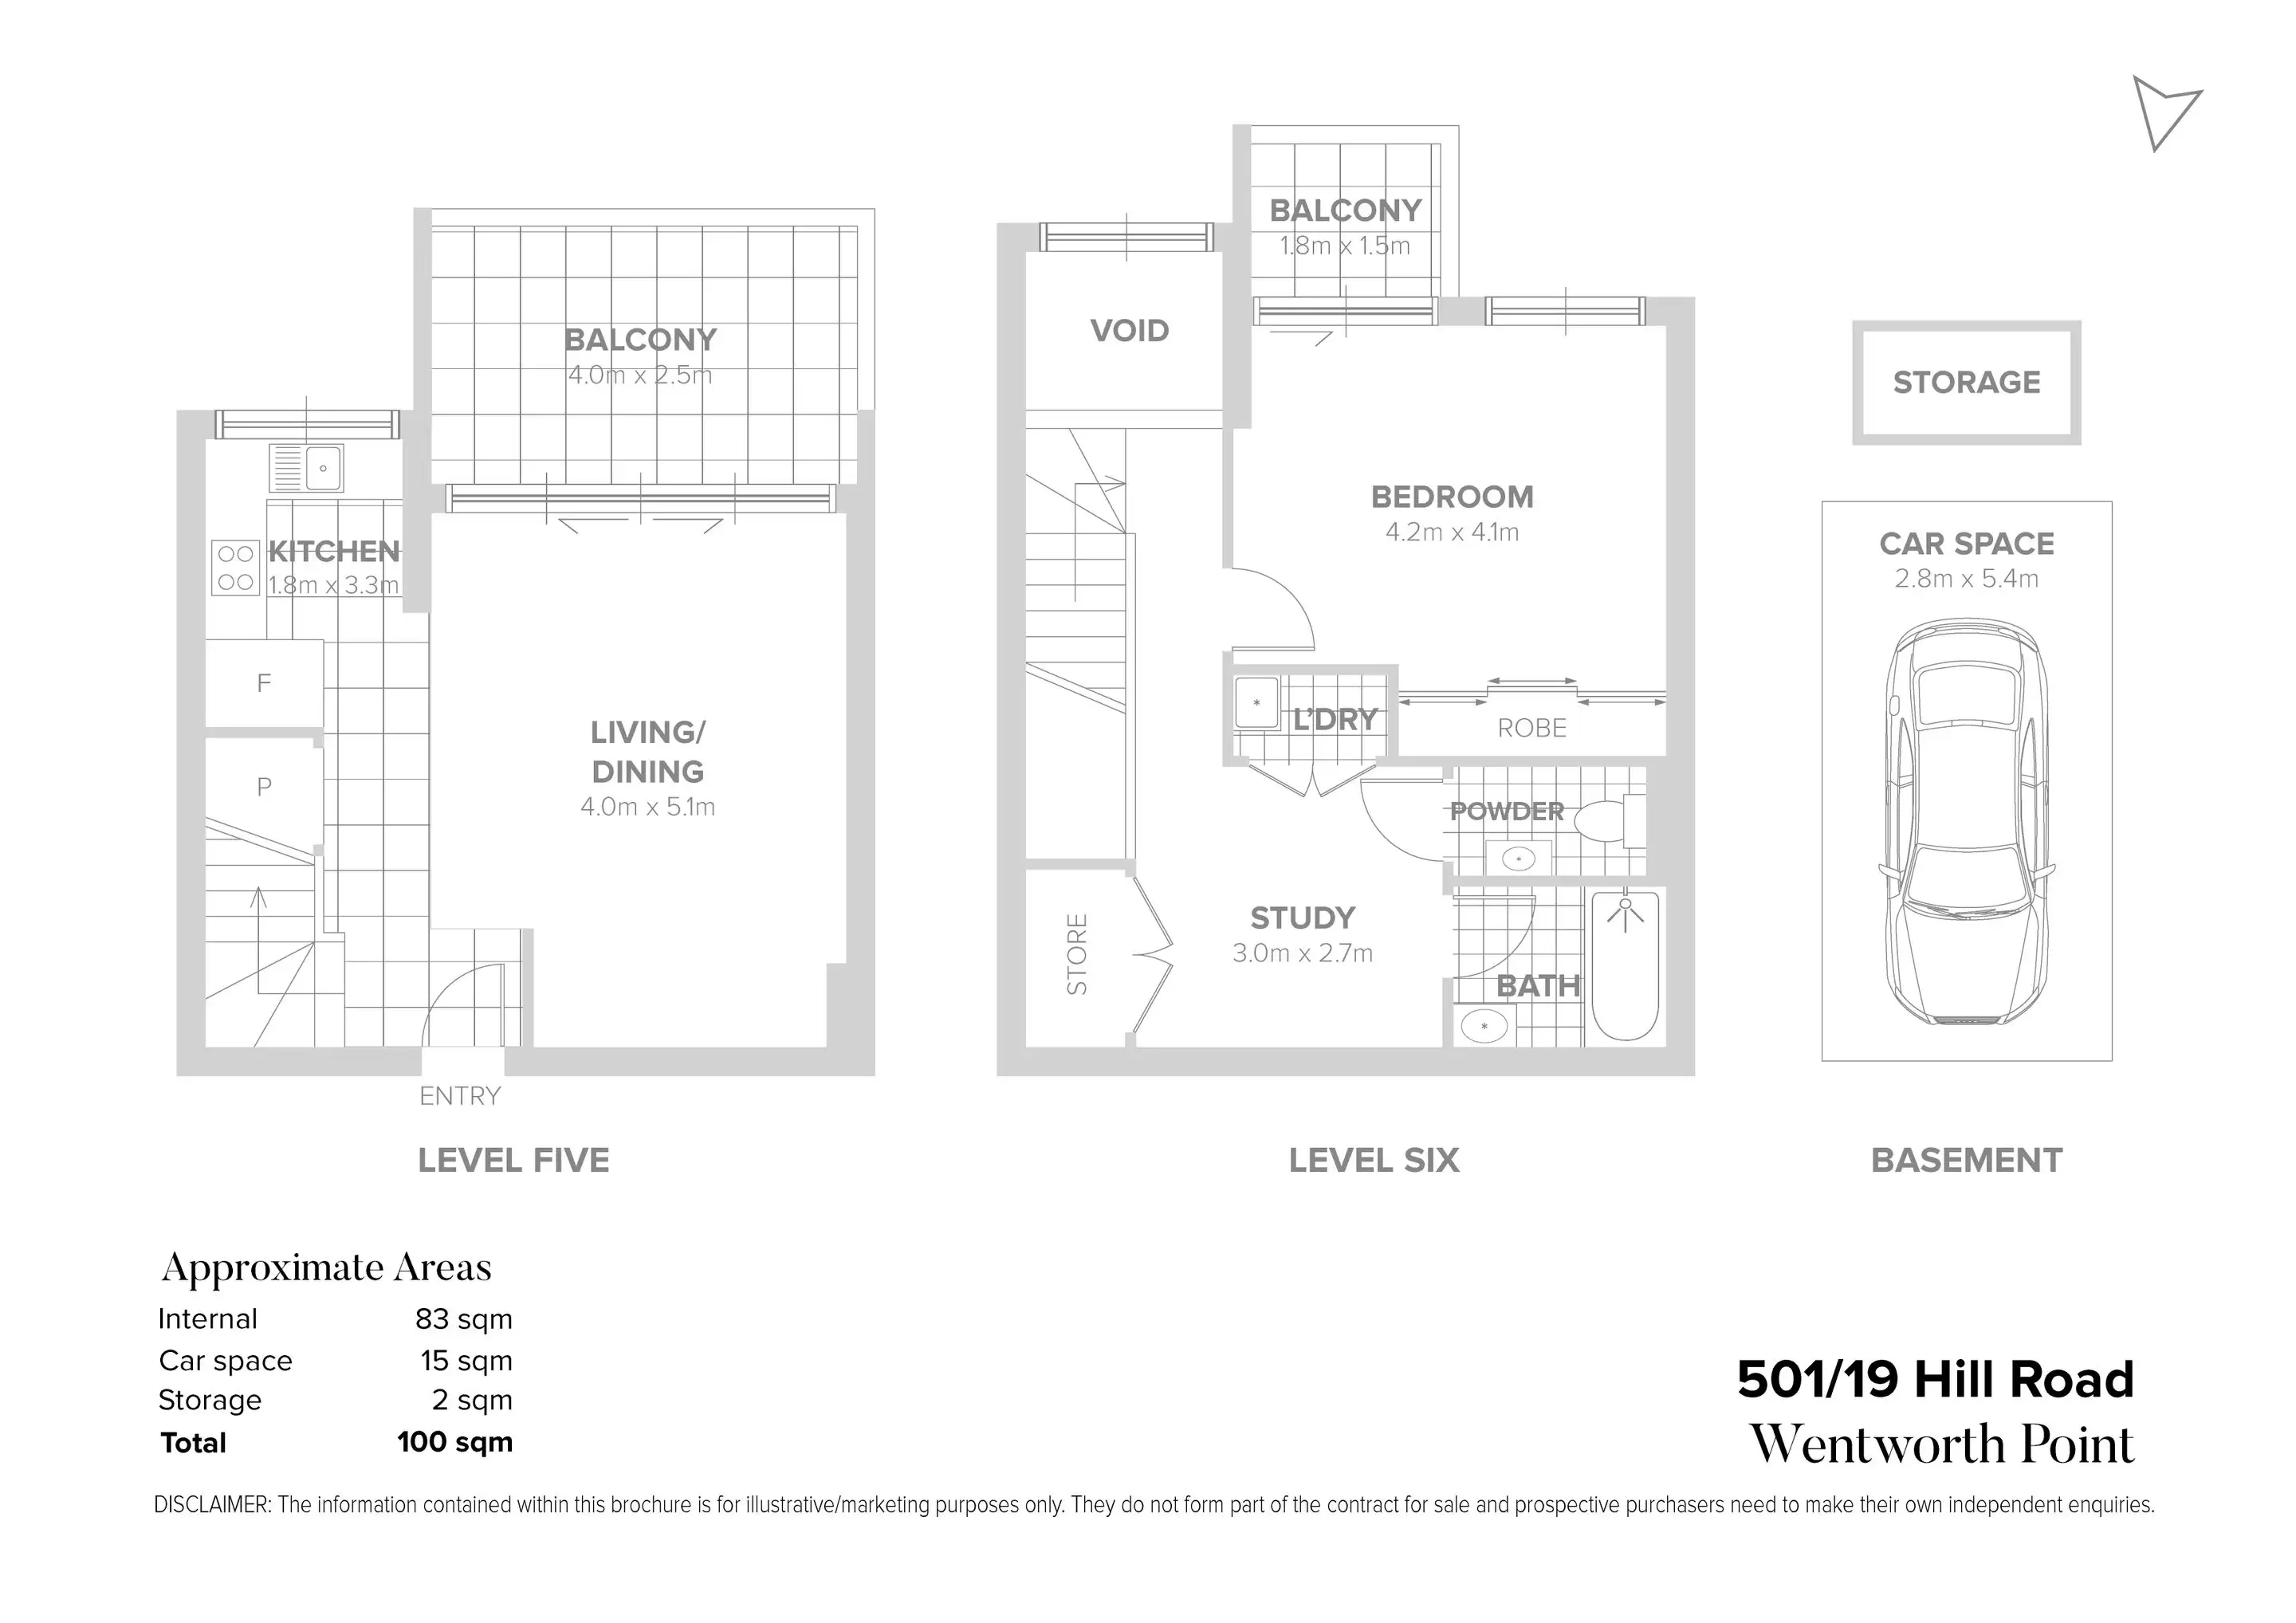 501/19 Hill Road, Wentworth Point Sold by Chidiac Realty - floorplan